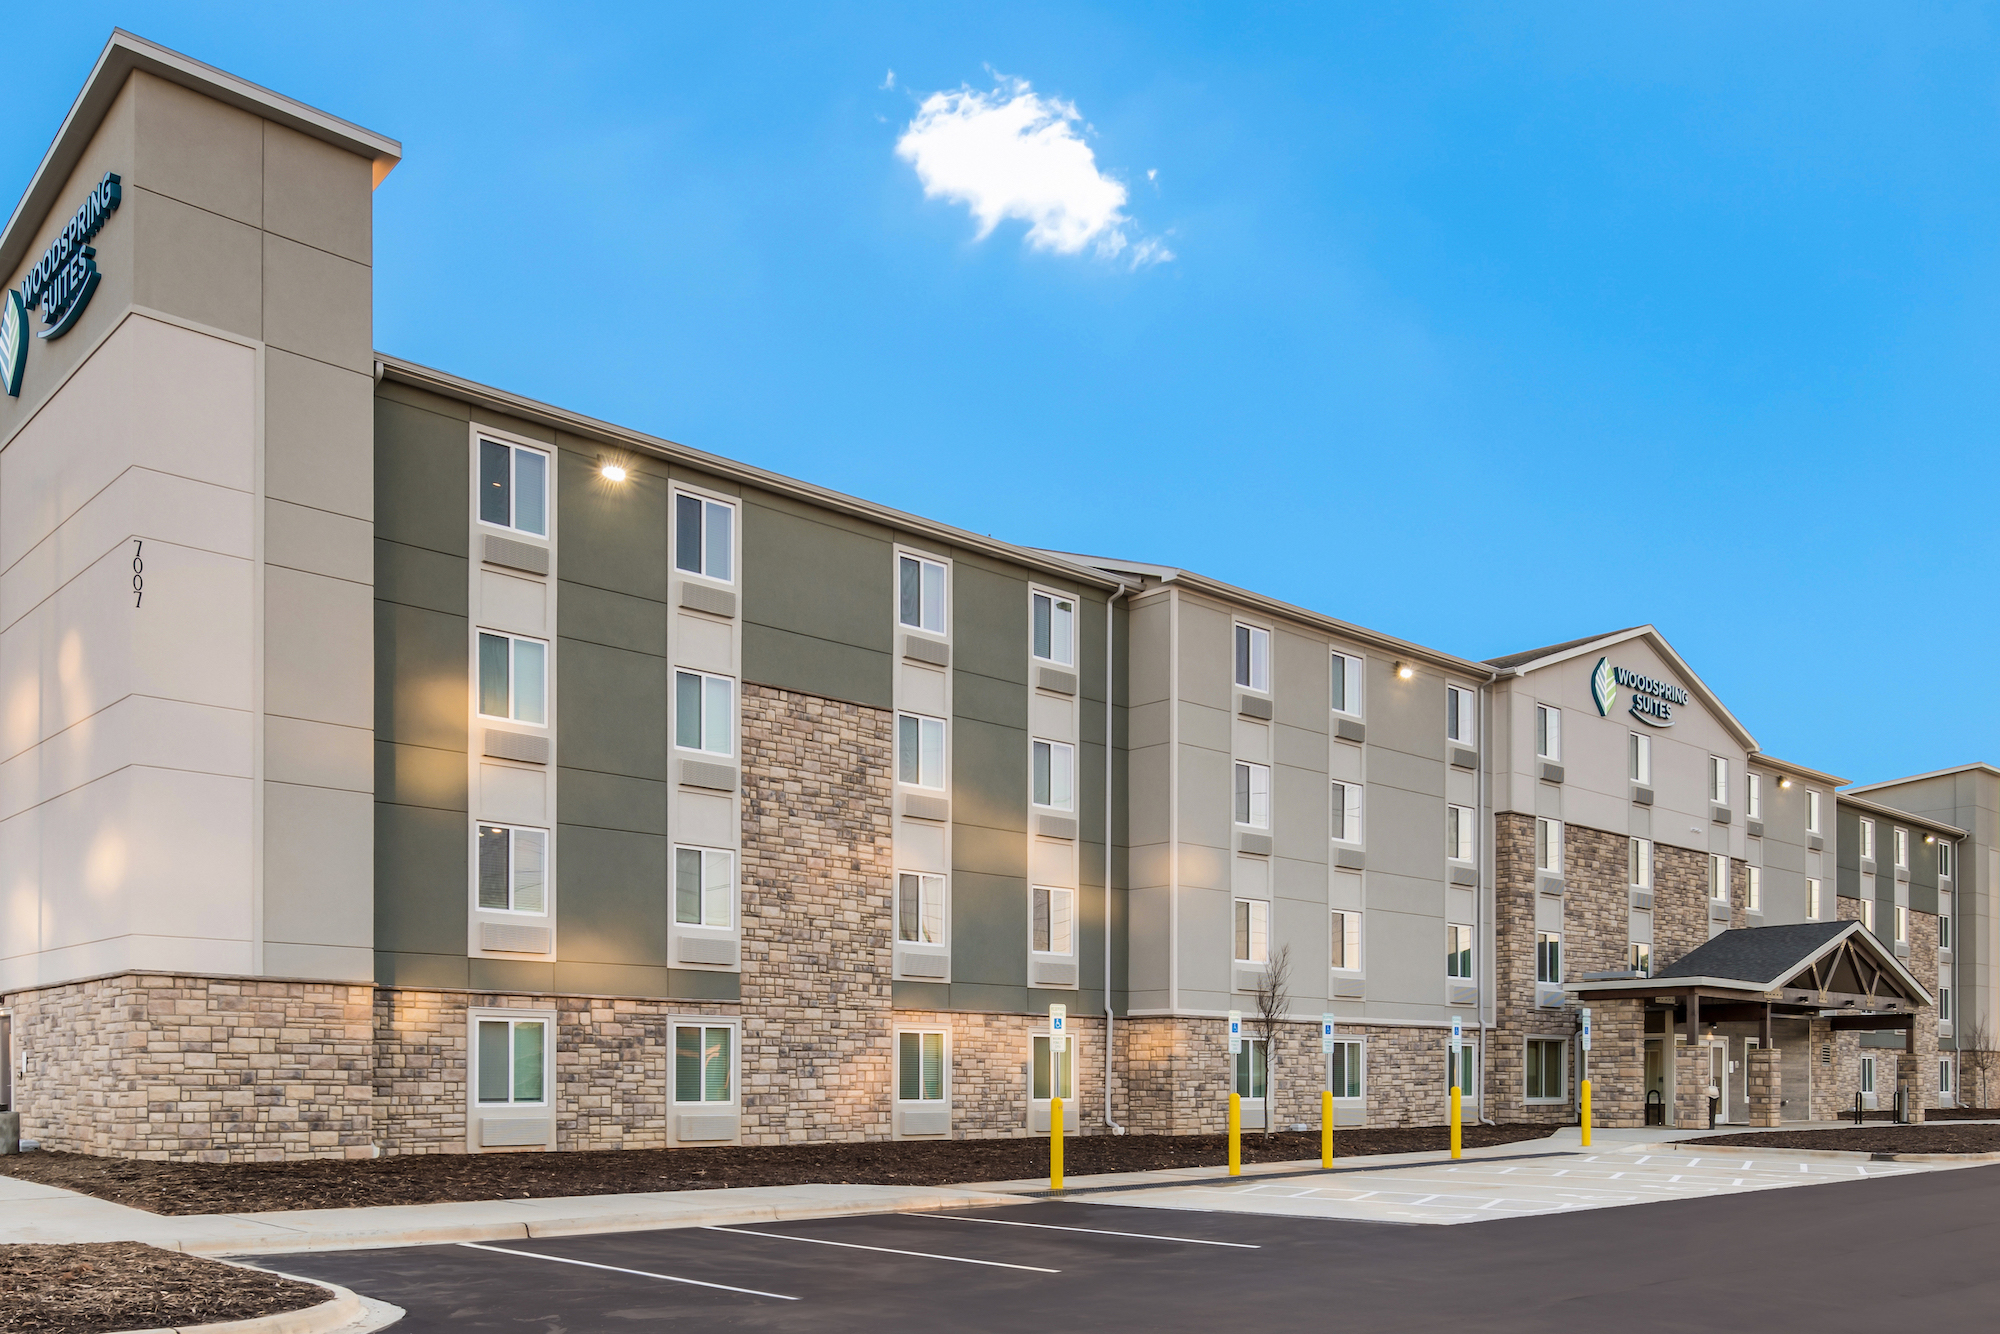 The new WoodSpring Suites Charlotte – University Research Park features 123 spacious rooms.